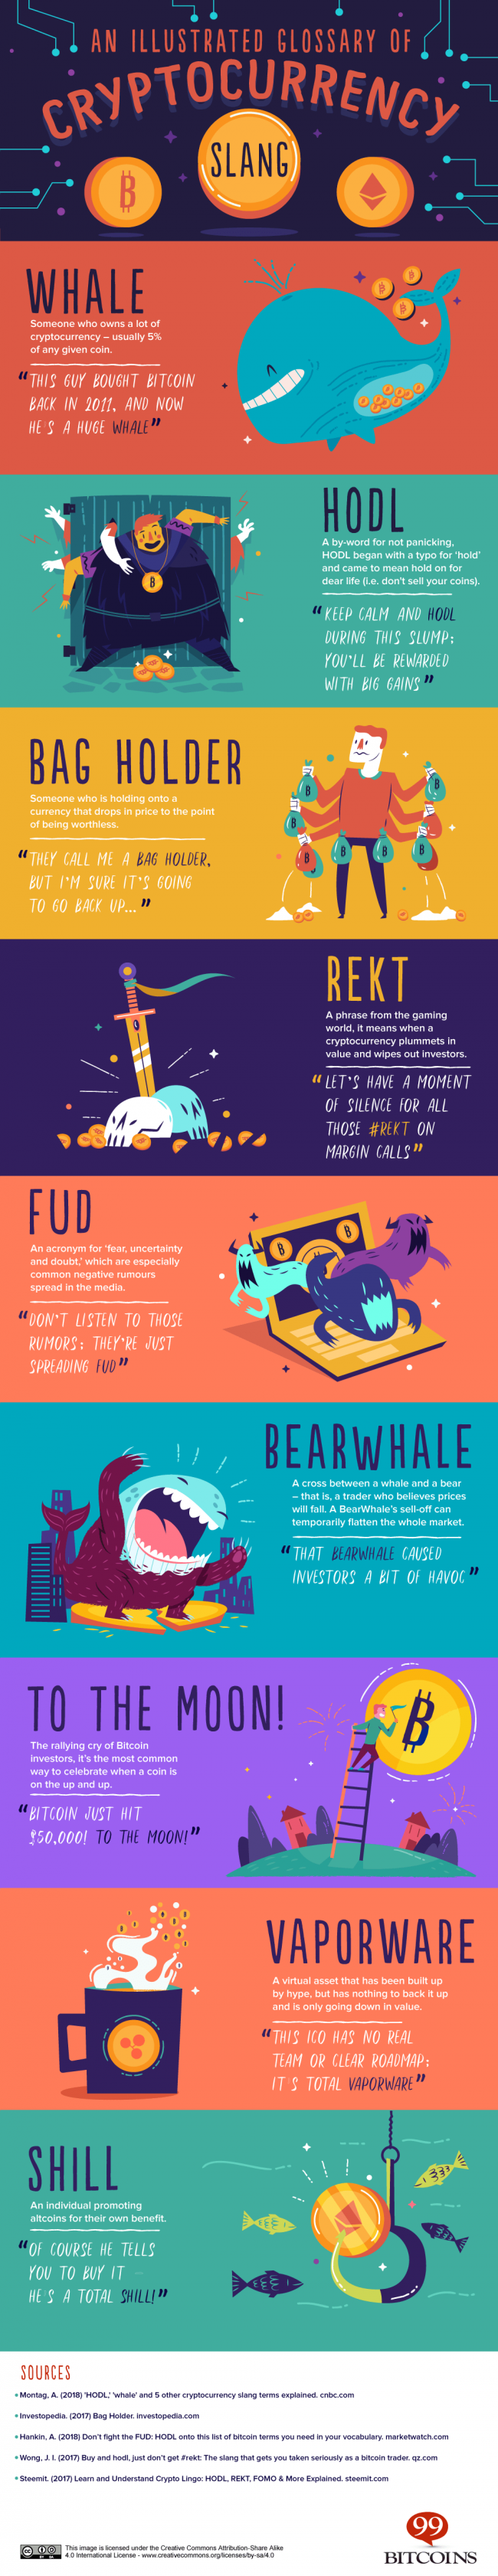 infographic about cryptocurrency slang